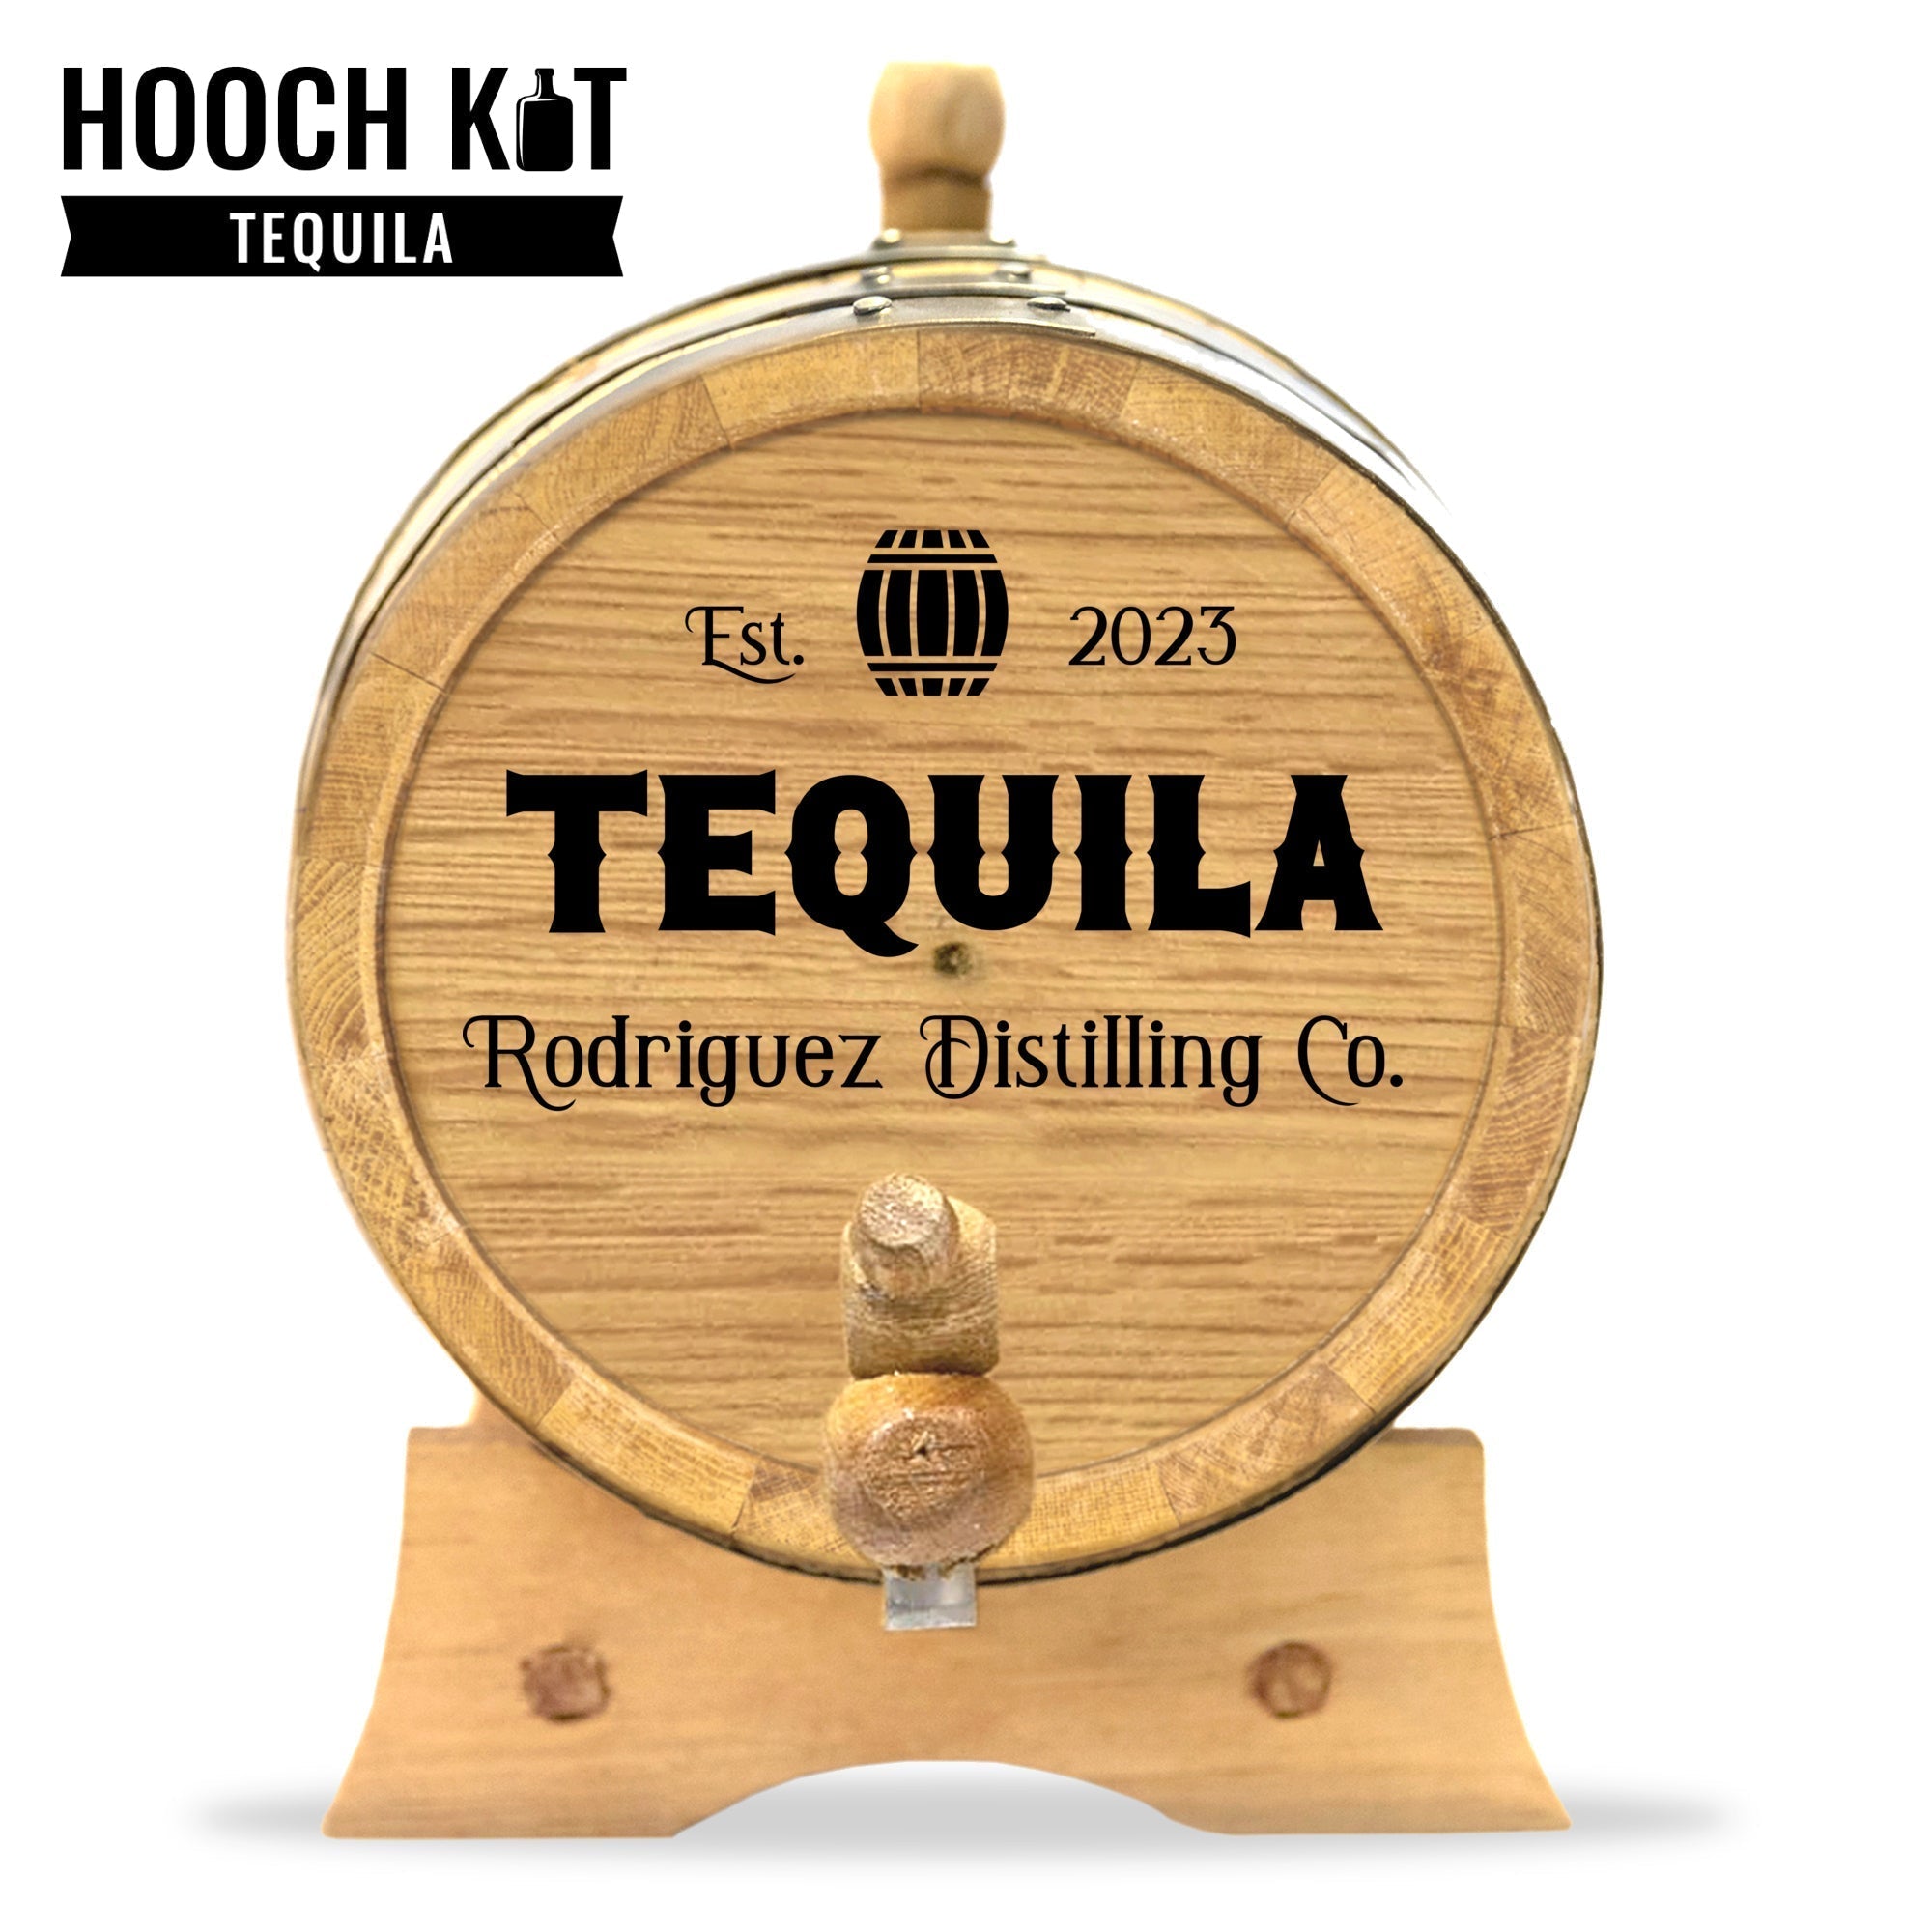 Personalized Tequila Barrel + Tequila Making Kit | The Home Distiller's Choice for DIY Spirits | Distilling Co. Series - Blind Pig Drinking Co.